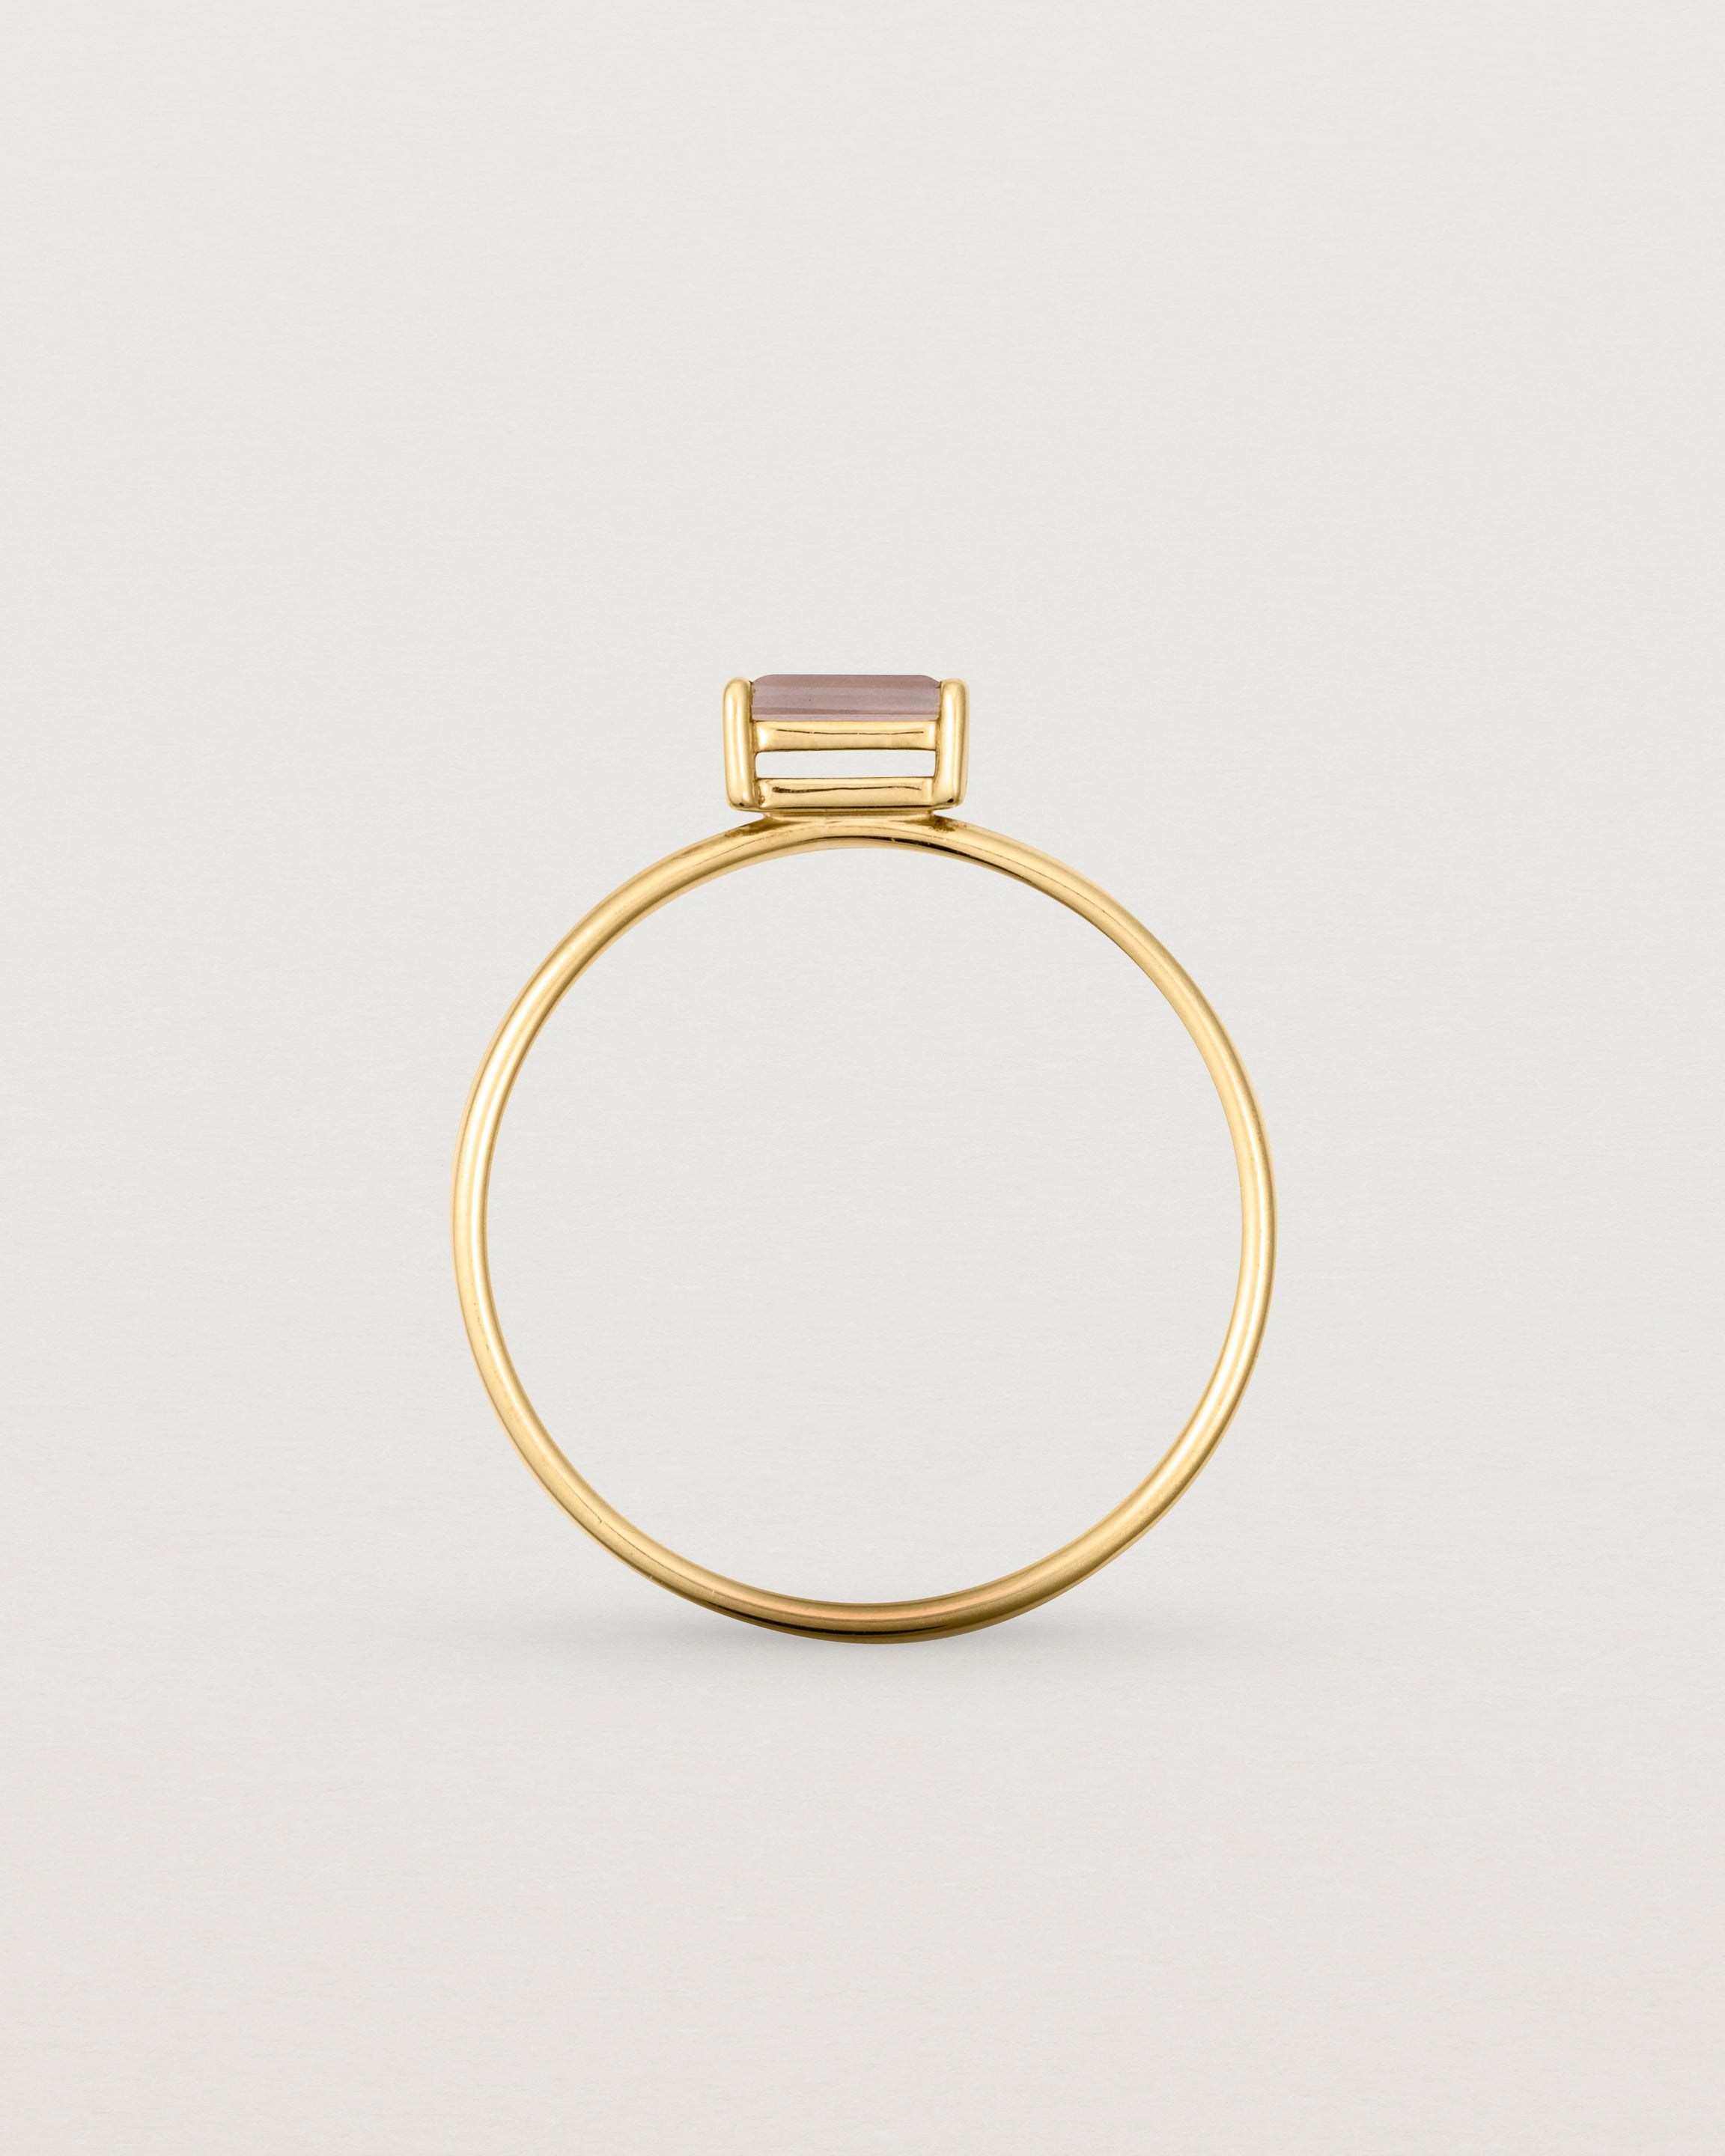 Standing view of the Horizontal Baguette Ring | Smokey Quartz in Yellow Gold.